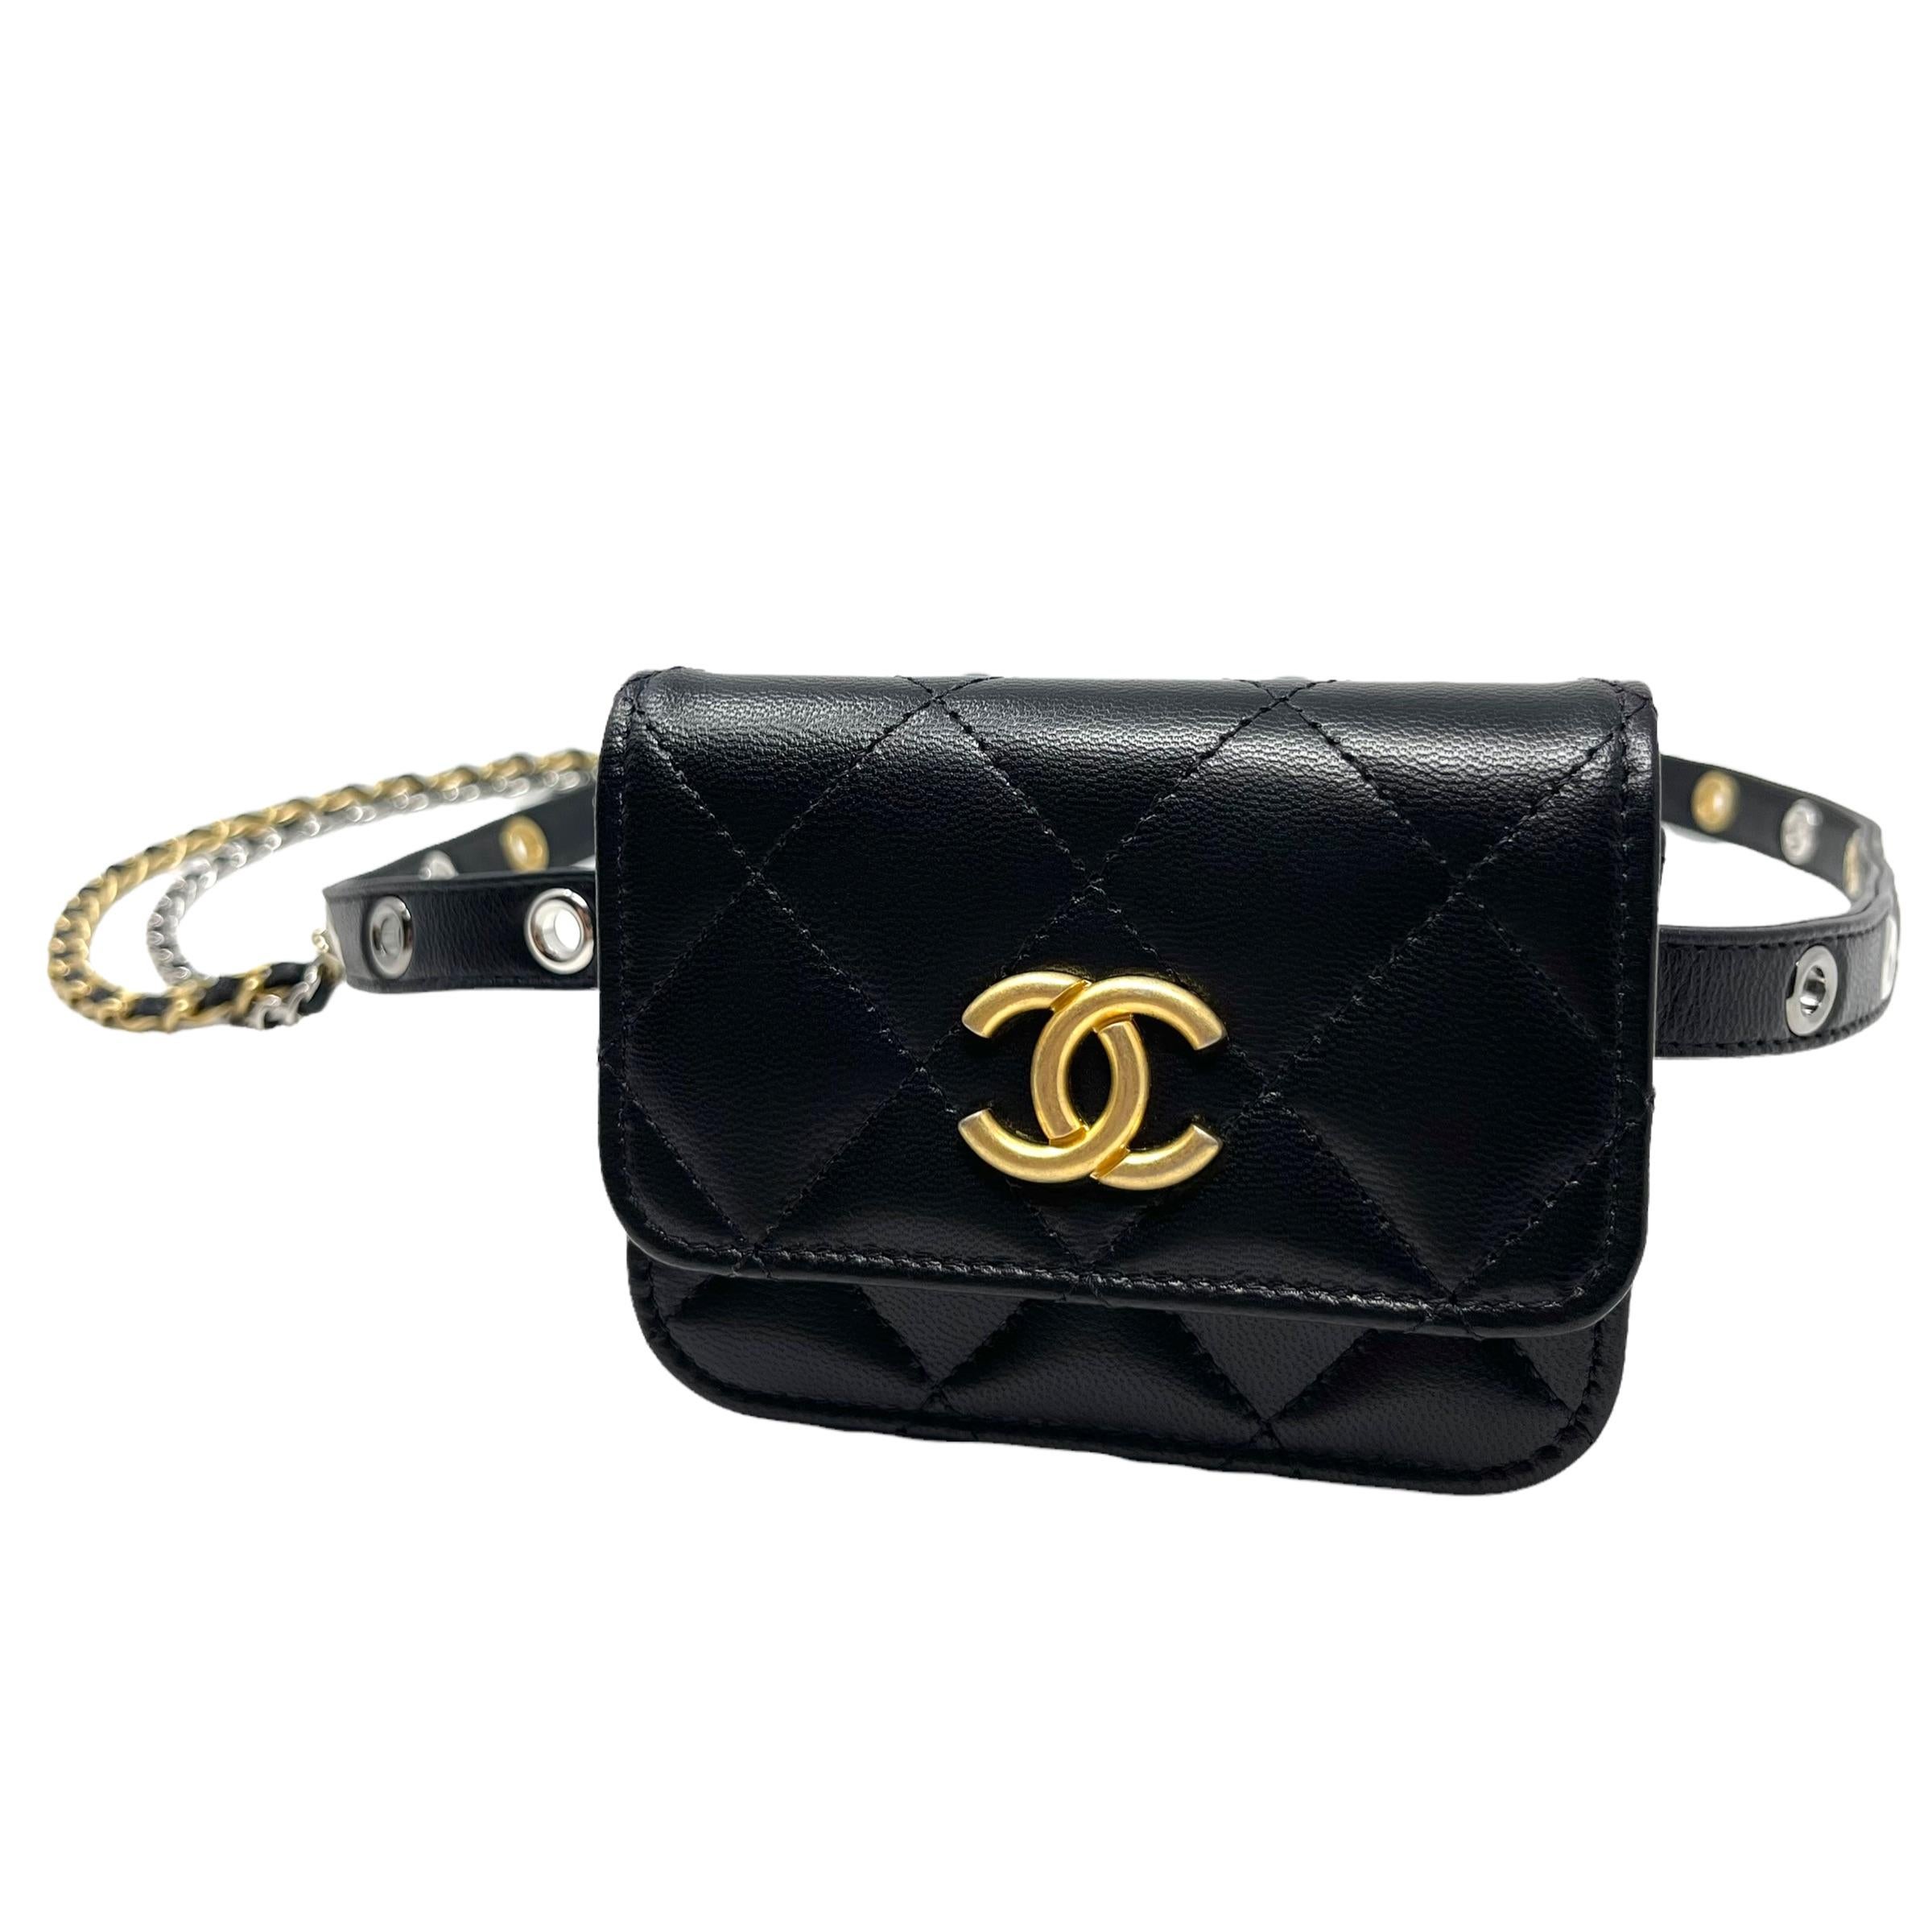 Women's NEW Chanel Black Quilted Leather Waist Bag Belt Bag For Sale